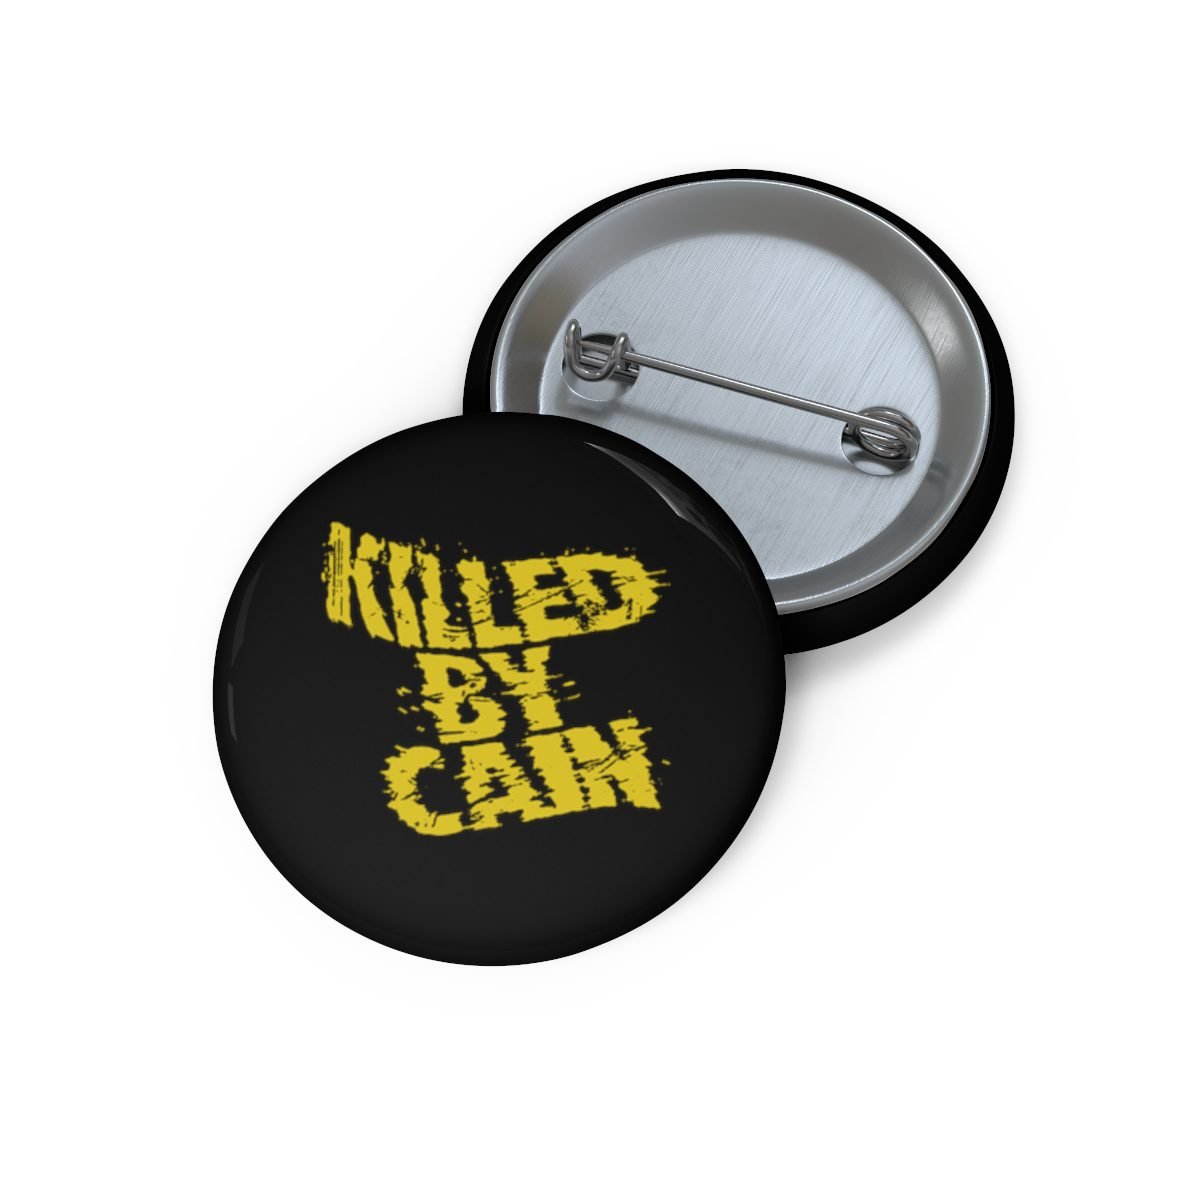 Killed By Cain Logo Pin Buttons